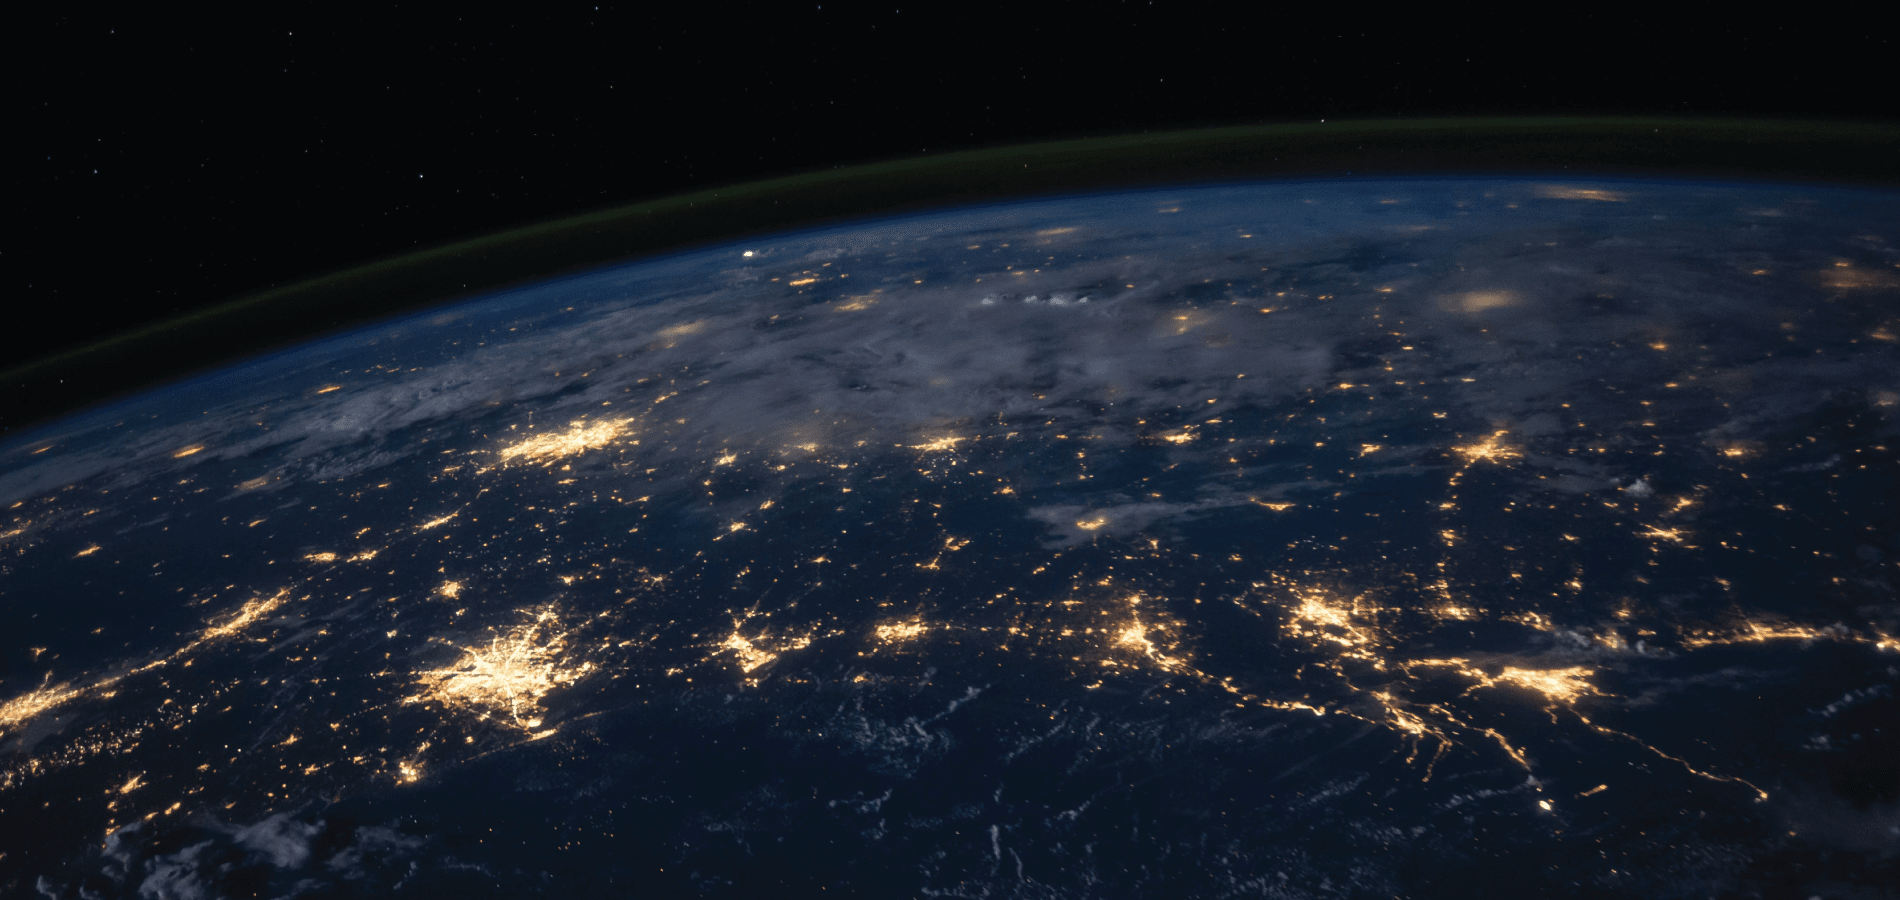 image of Earth from space